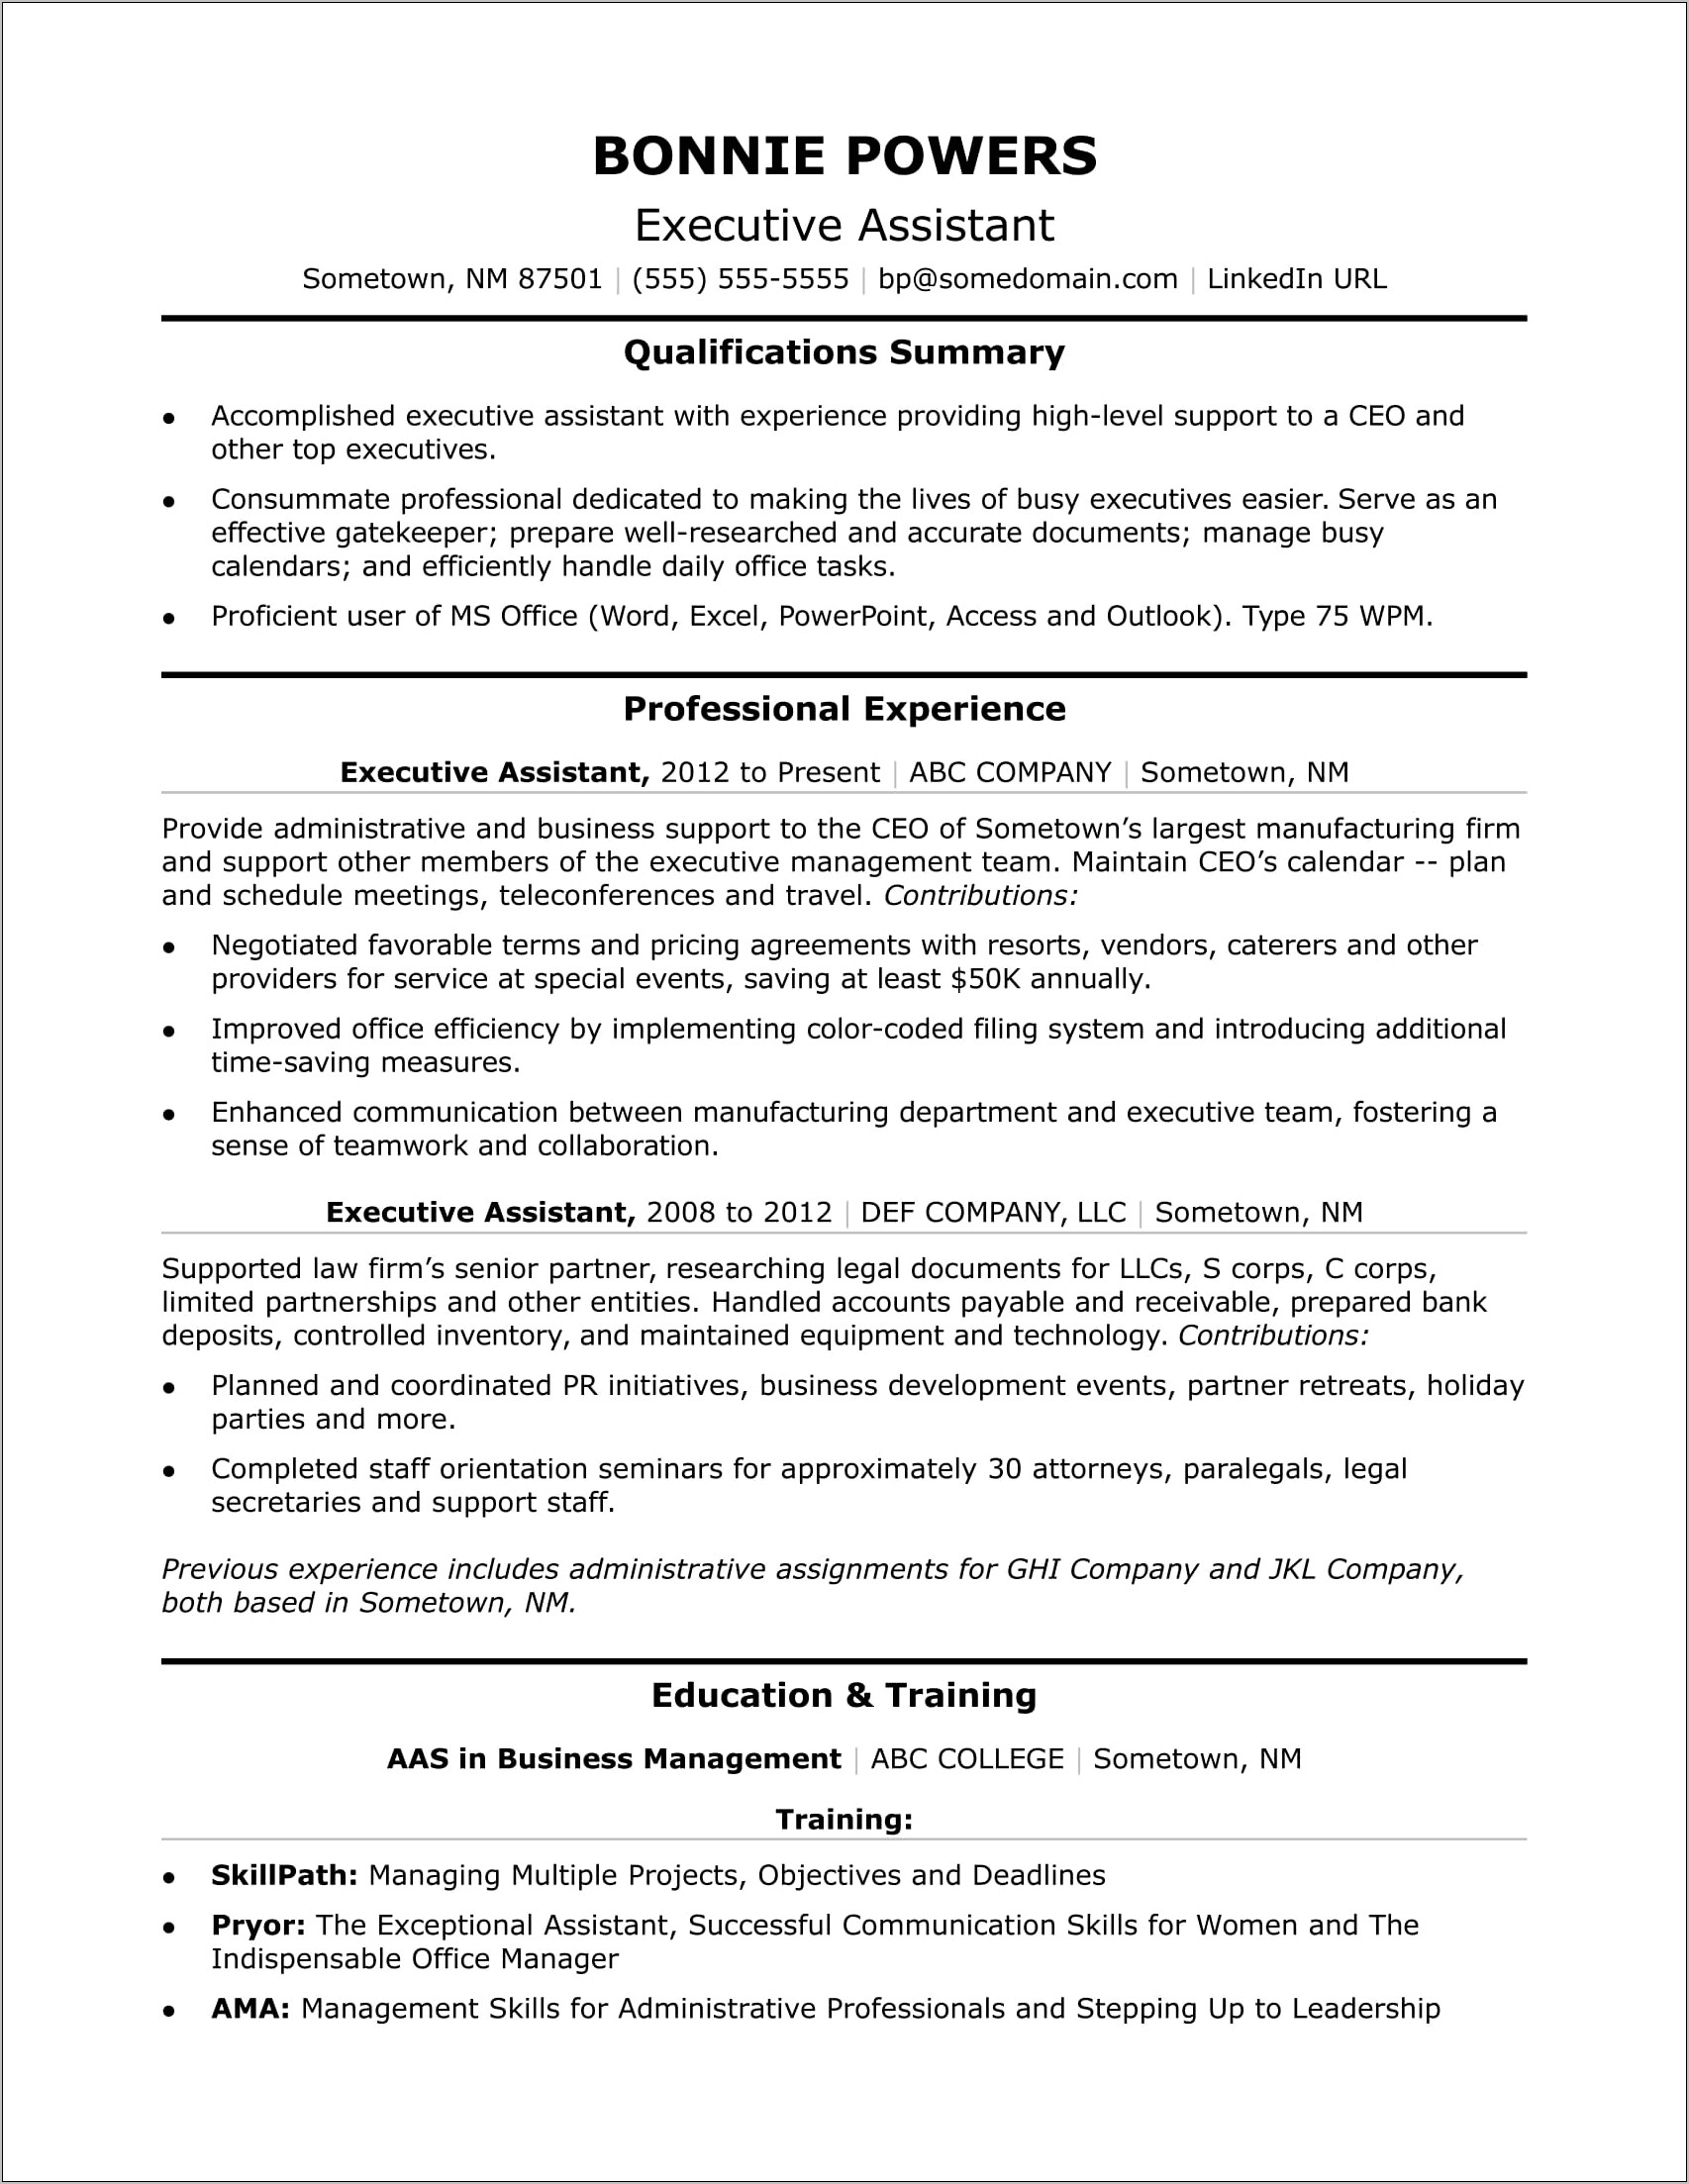 Administrative Assistant Resume In Word Format